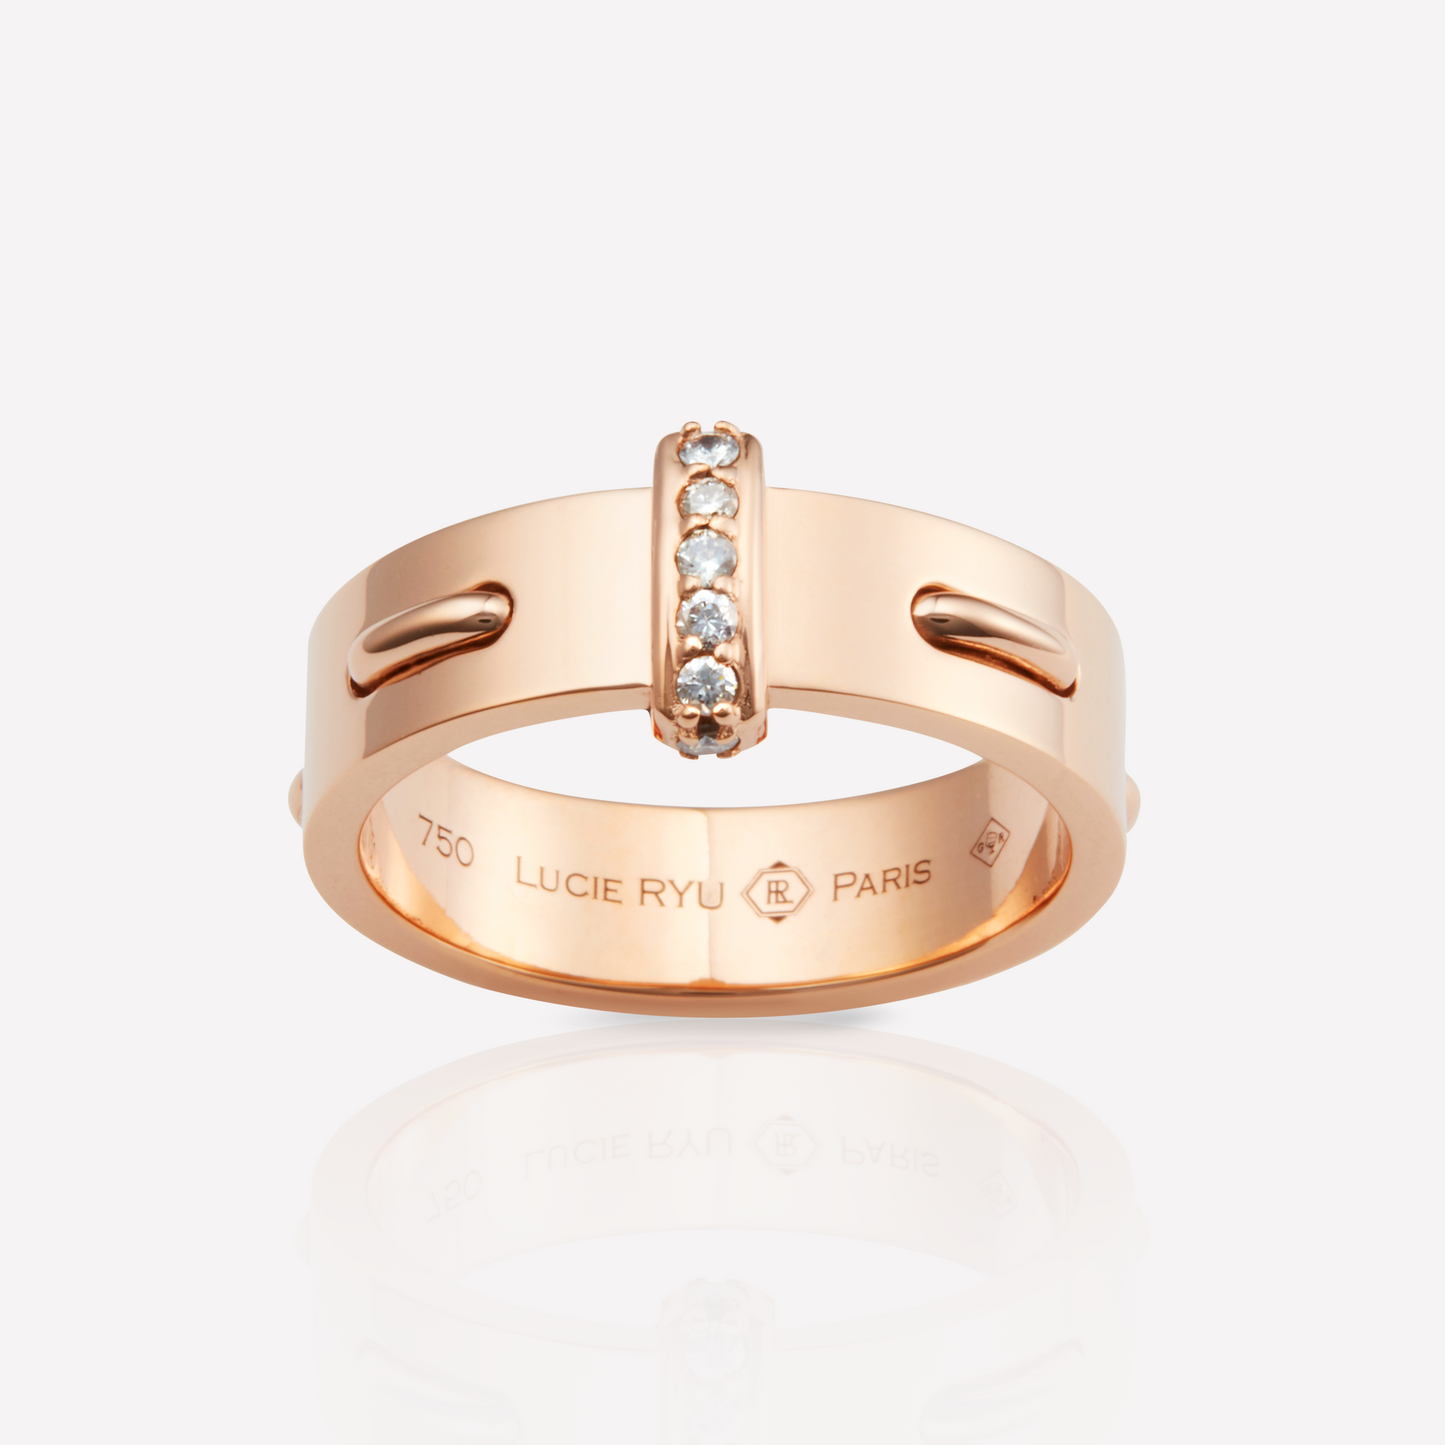 Twined 6,0 Bague, Diamant Bande